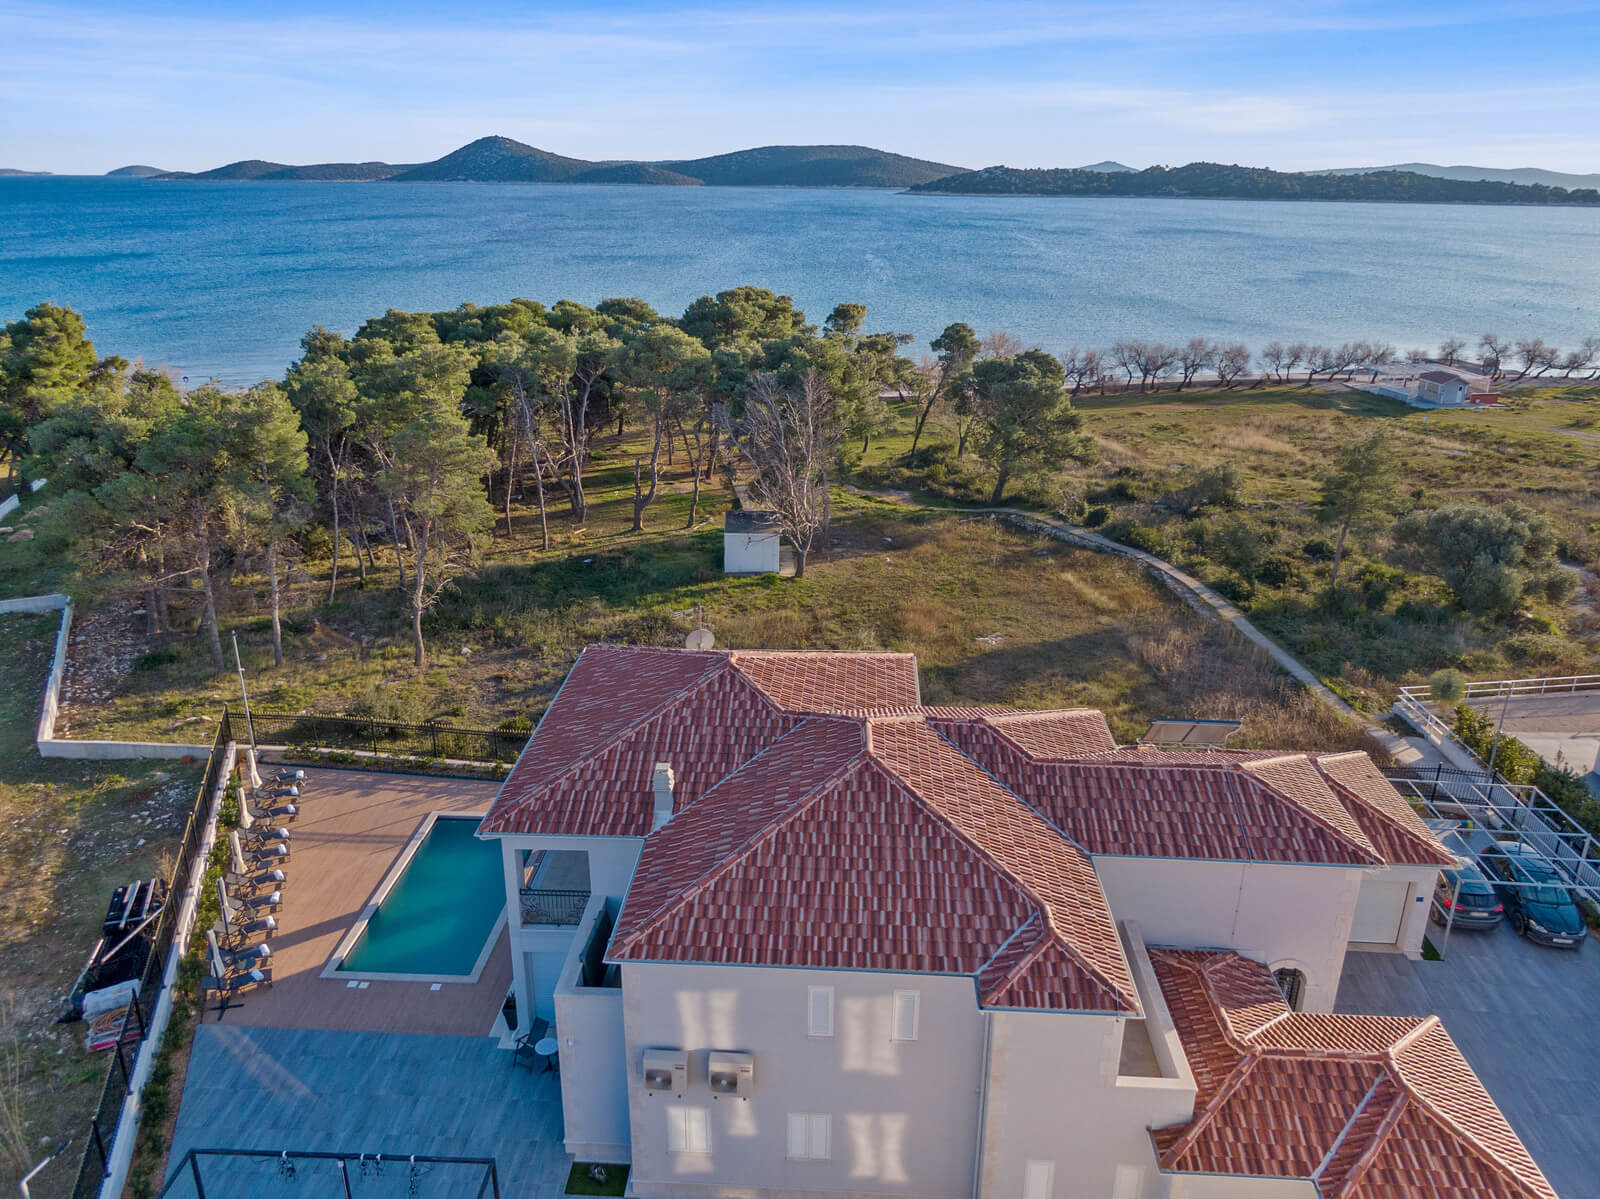 Seafront property for sale Croatia